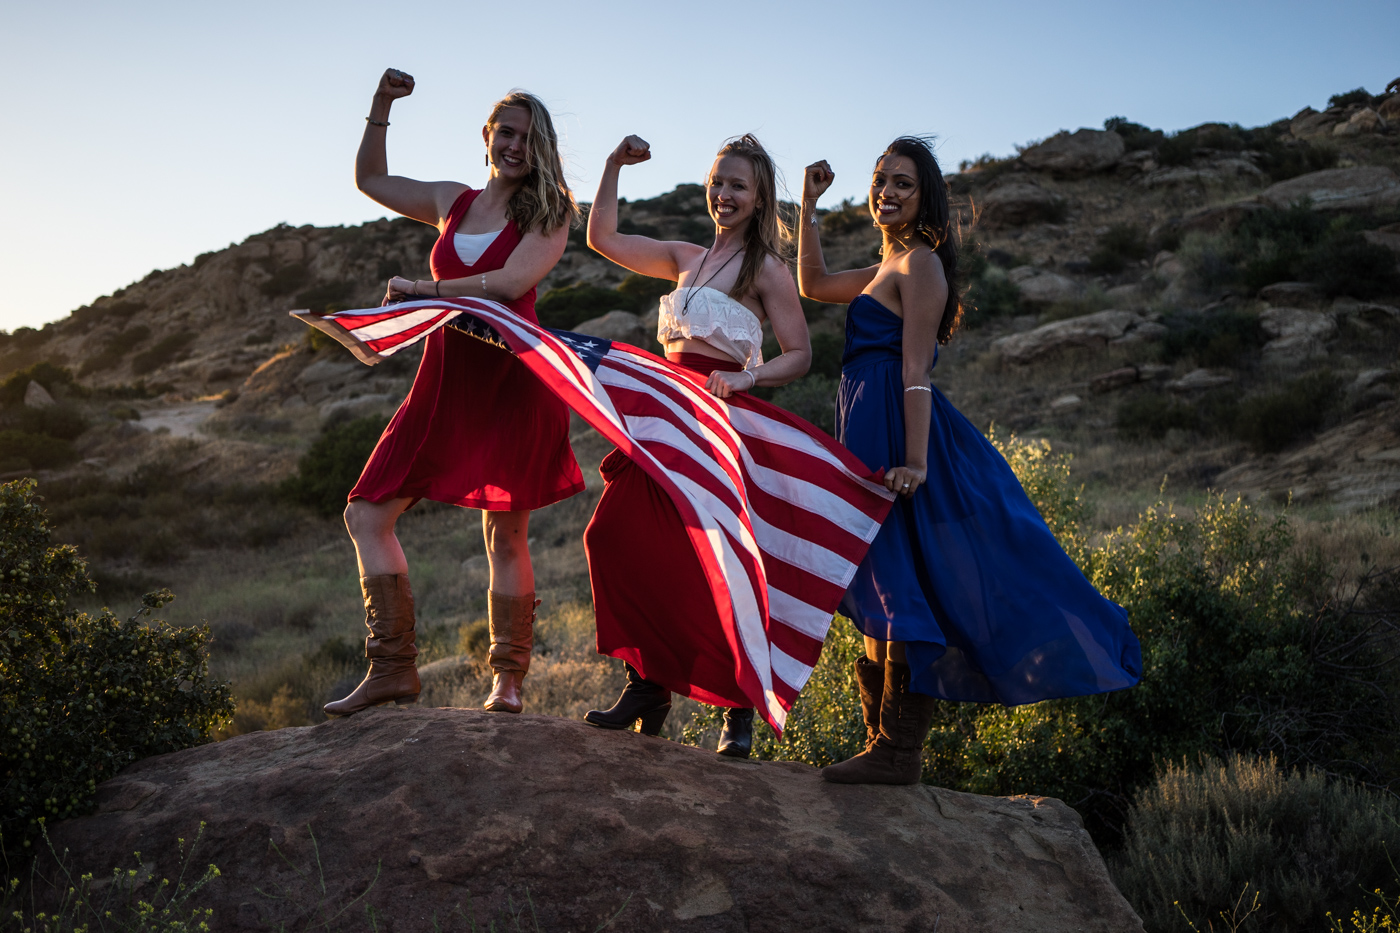 American women with waving flag portrait in grassy mountain landscape at sunset in rosy the riveter pose